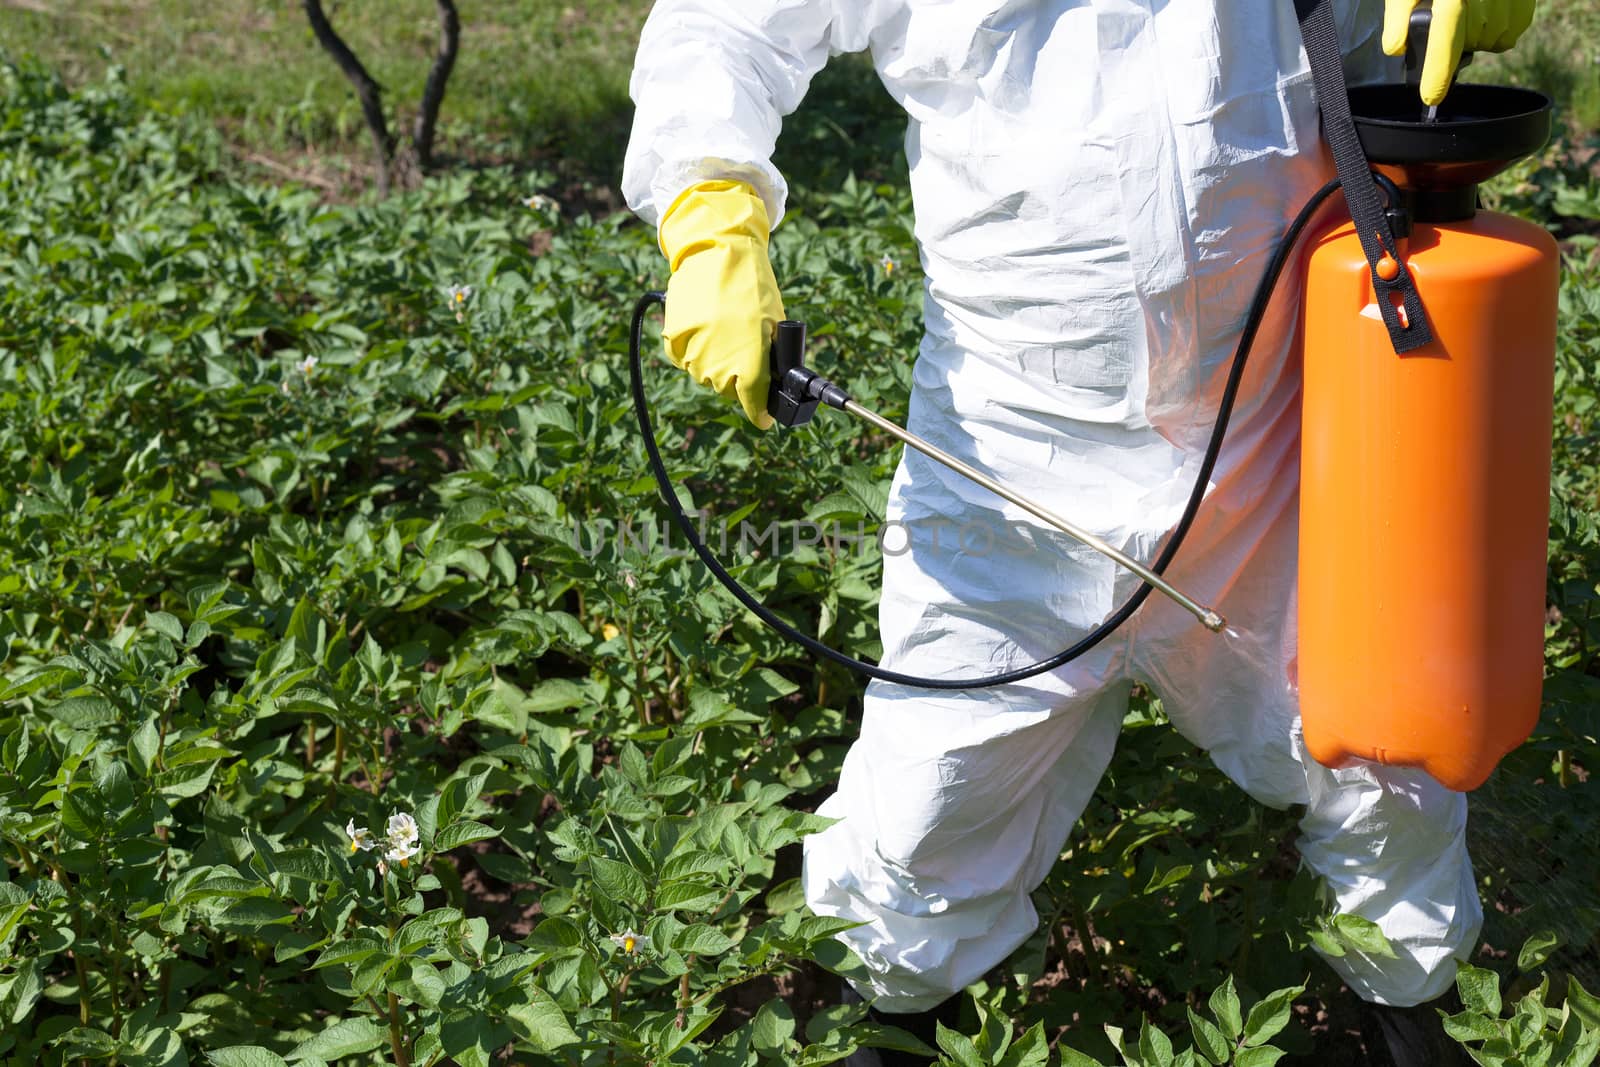 Man spraying toxic pesticides or insecticides in vegetable garde by wellphoto